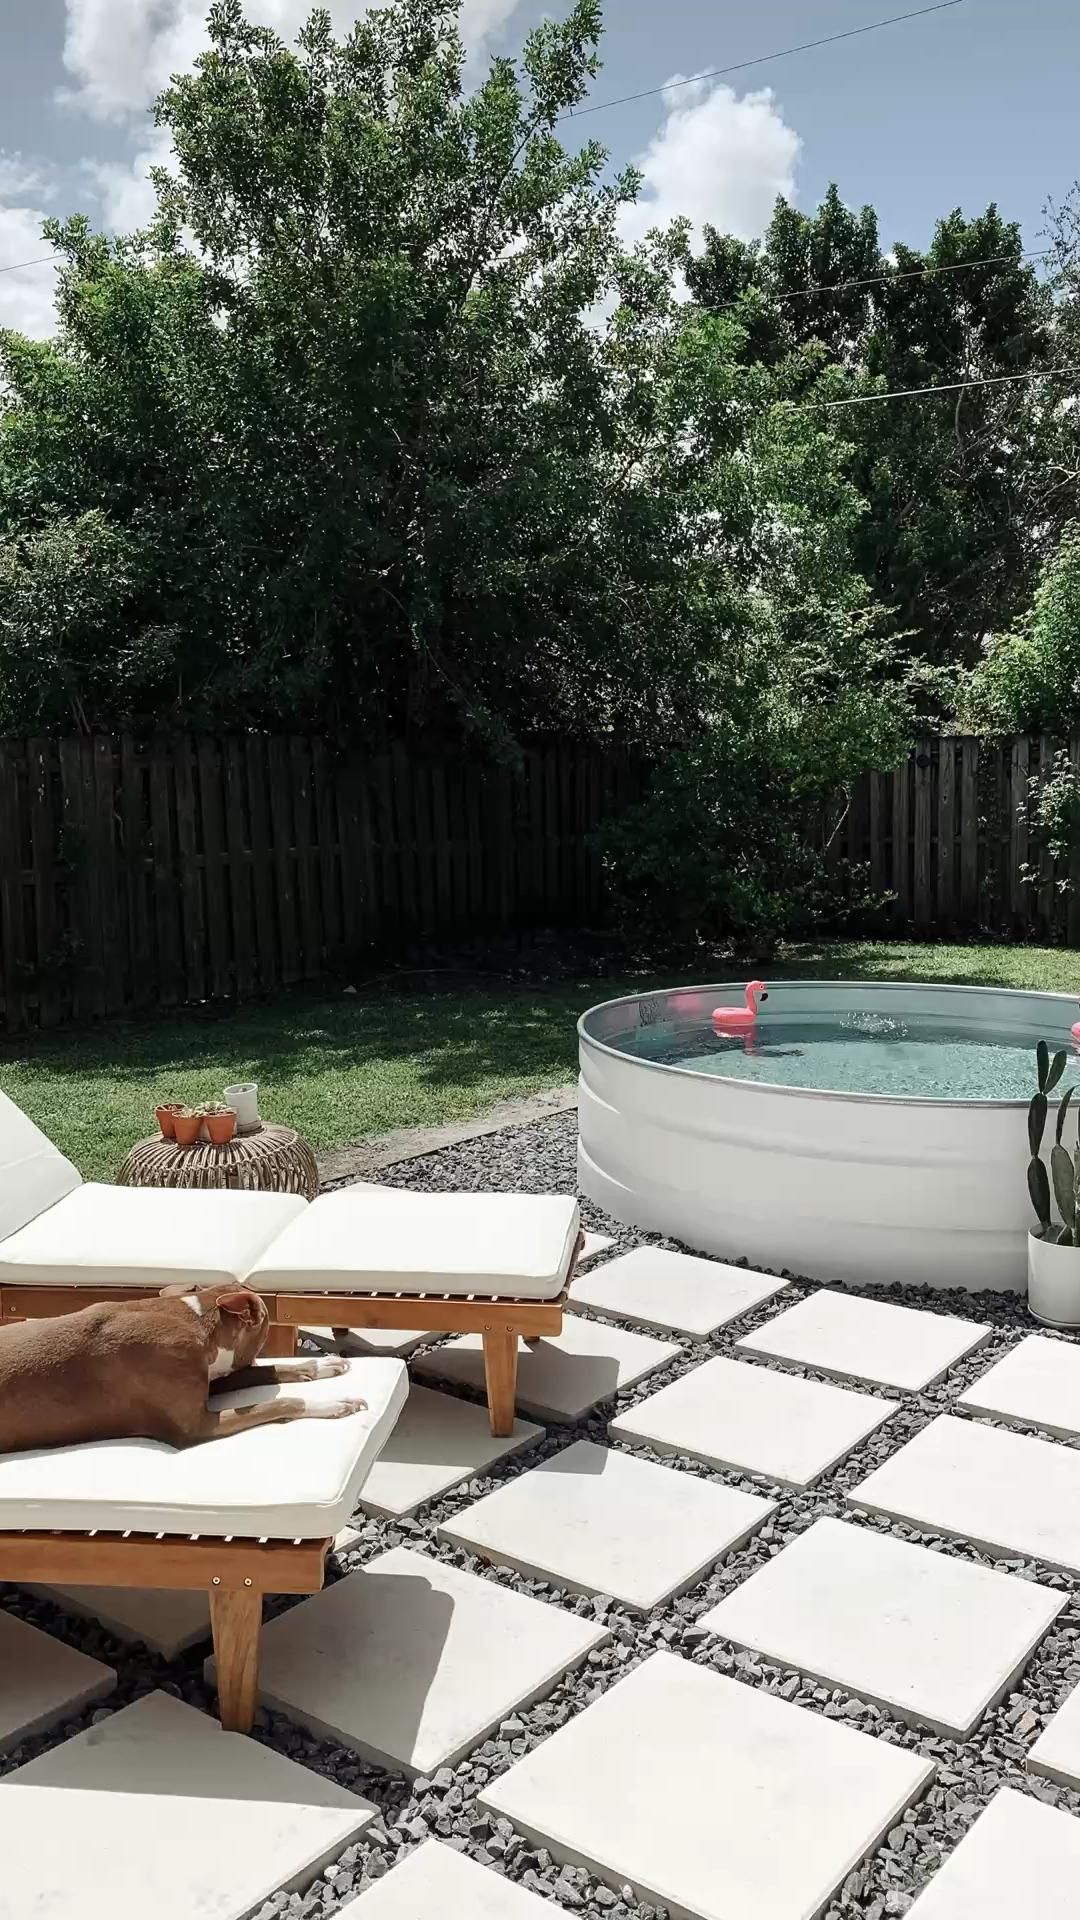 Stock Tank Pool Ideas Backyards Transform Your Outdoor Space with Creative Stock Tank Pool Designs